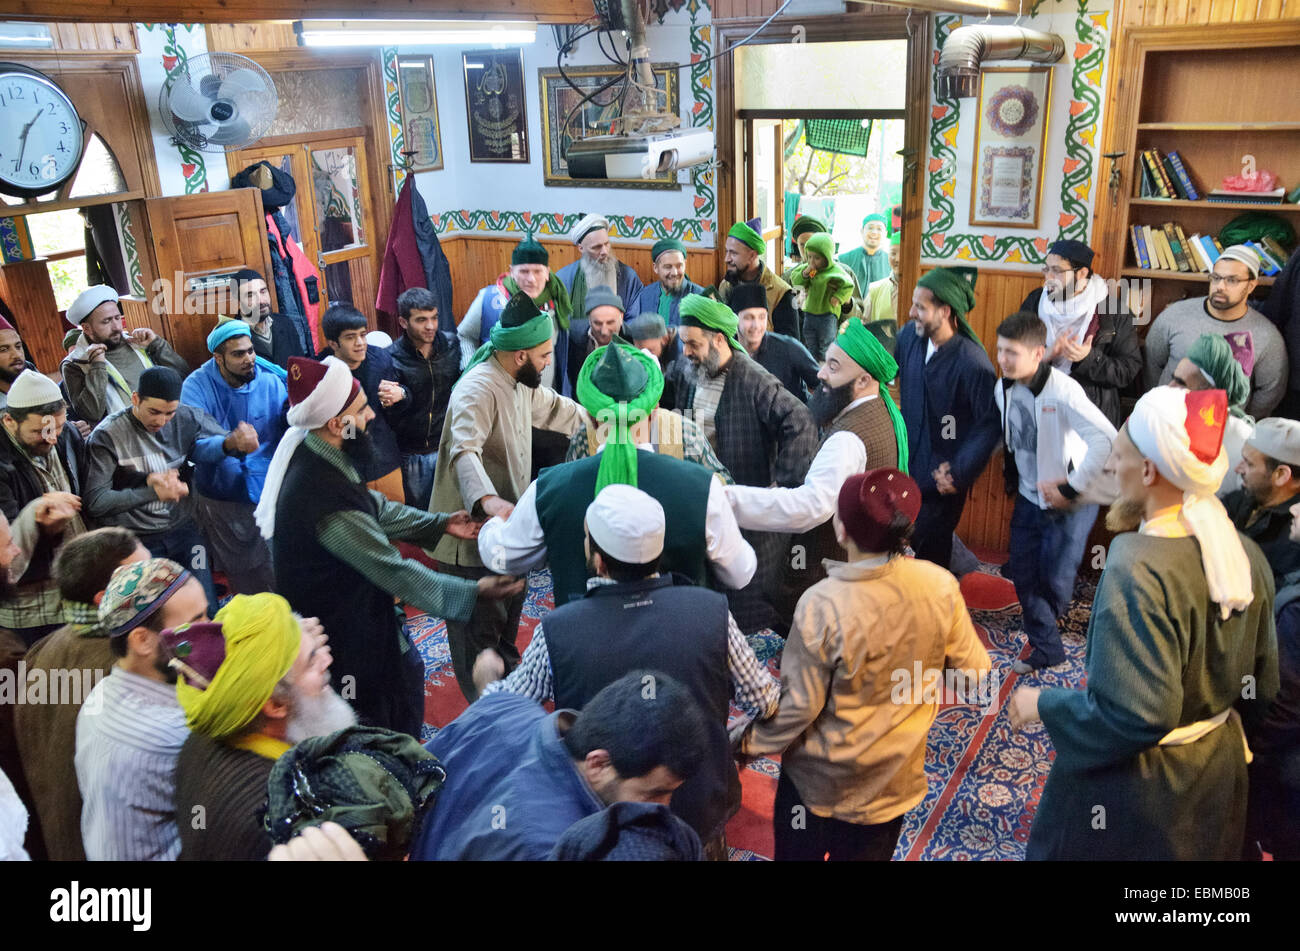 Muslims dancing during zhikr, mystical Sufi prayer, in the mosque inside the residence of Shaikh Nazim Al-Haqqani, leader of the Stock Photo